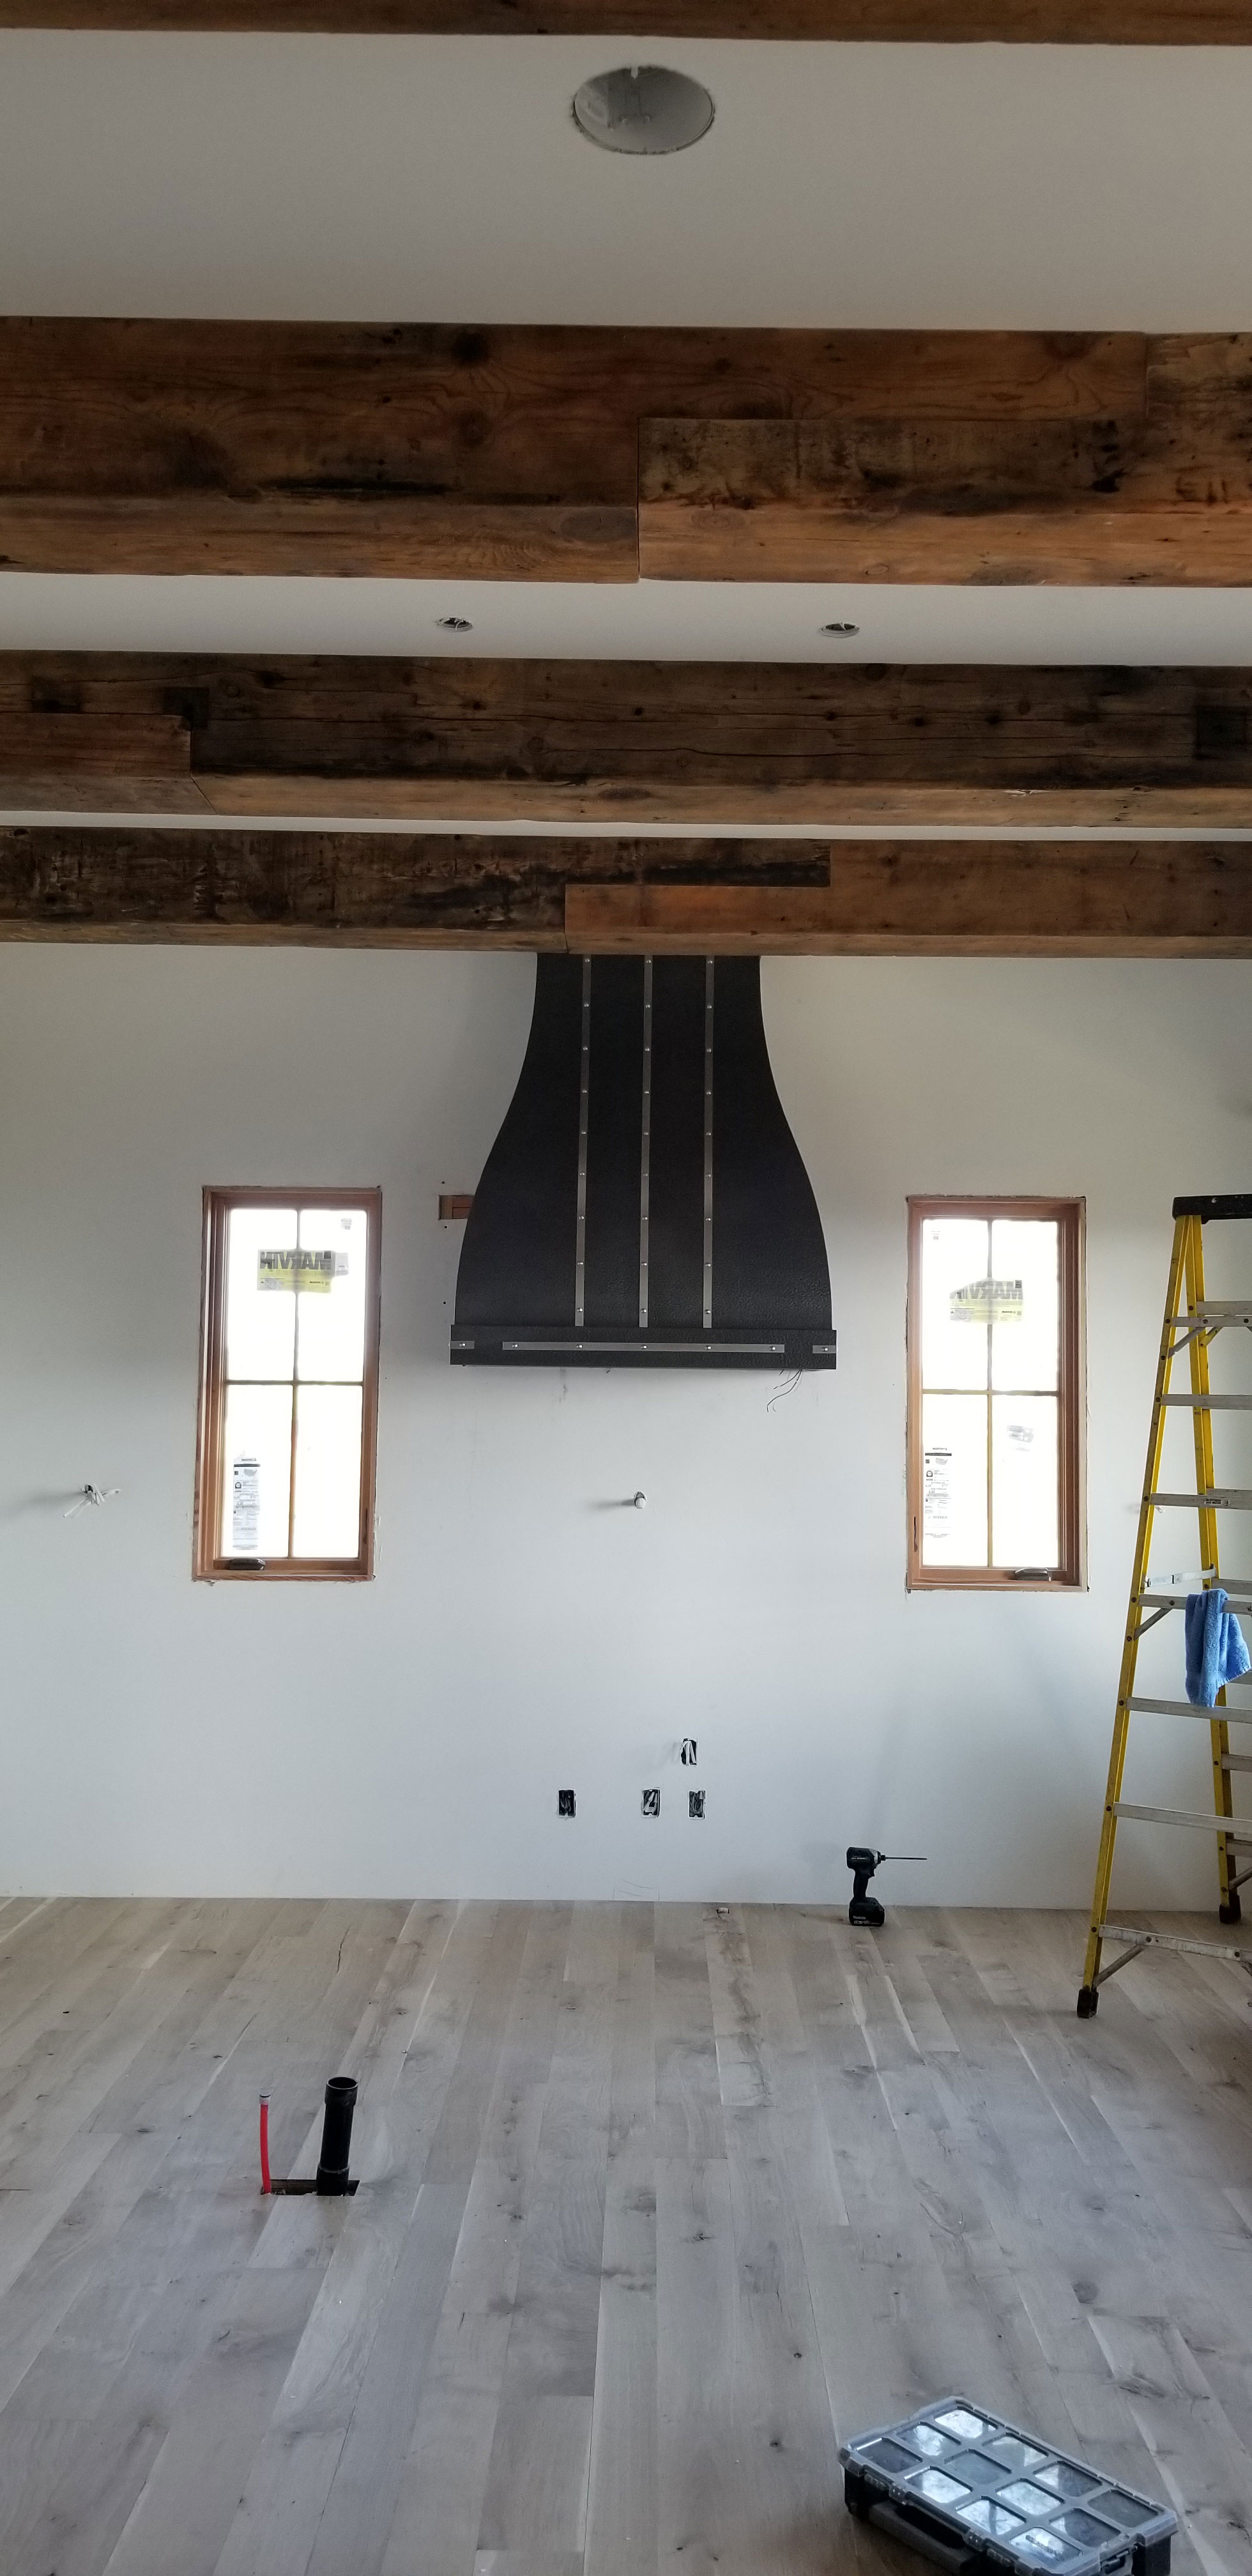 Black range hood with copper accents in remodeled kitchen World CopperSmith